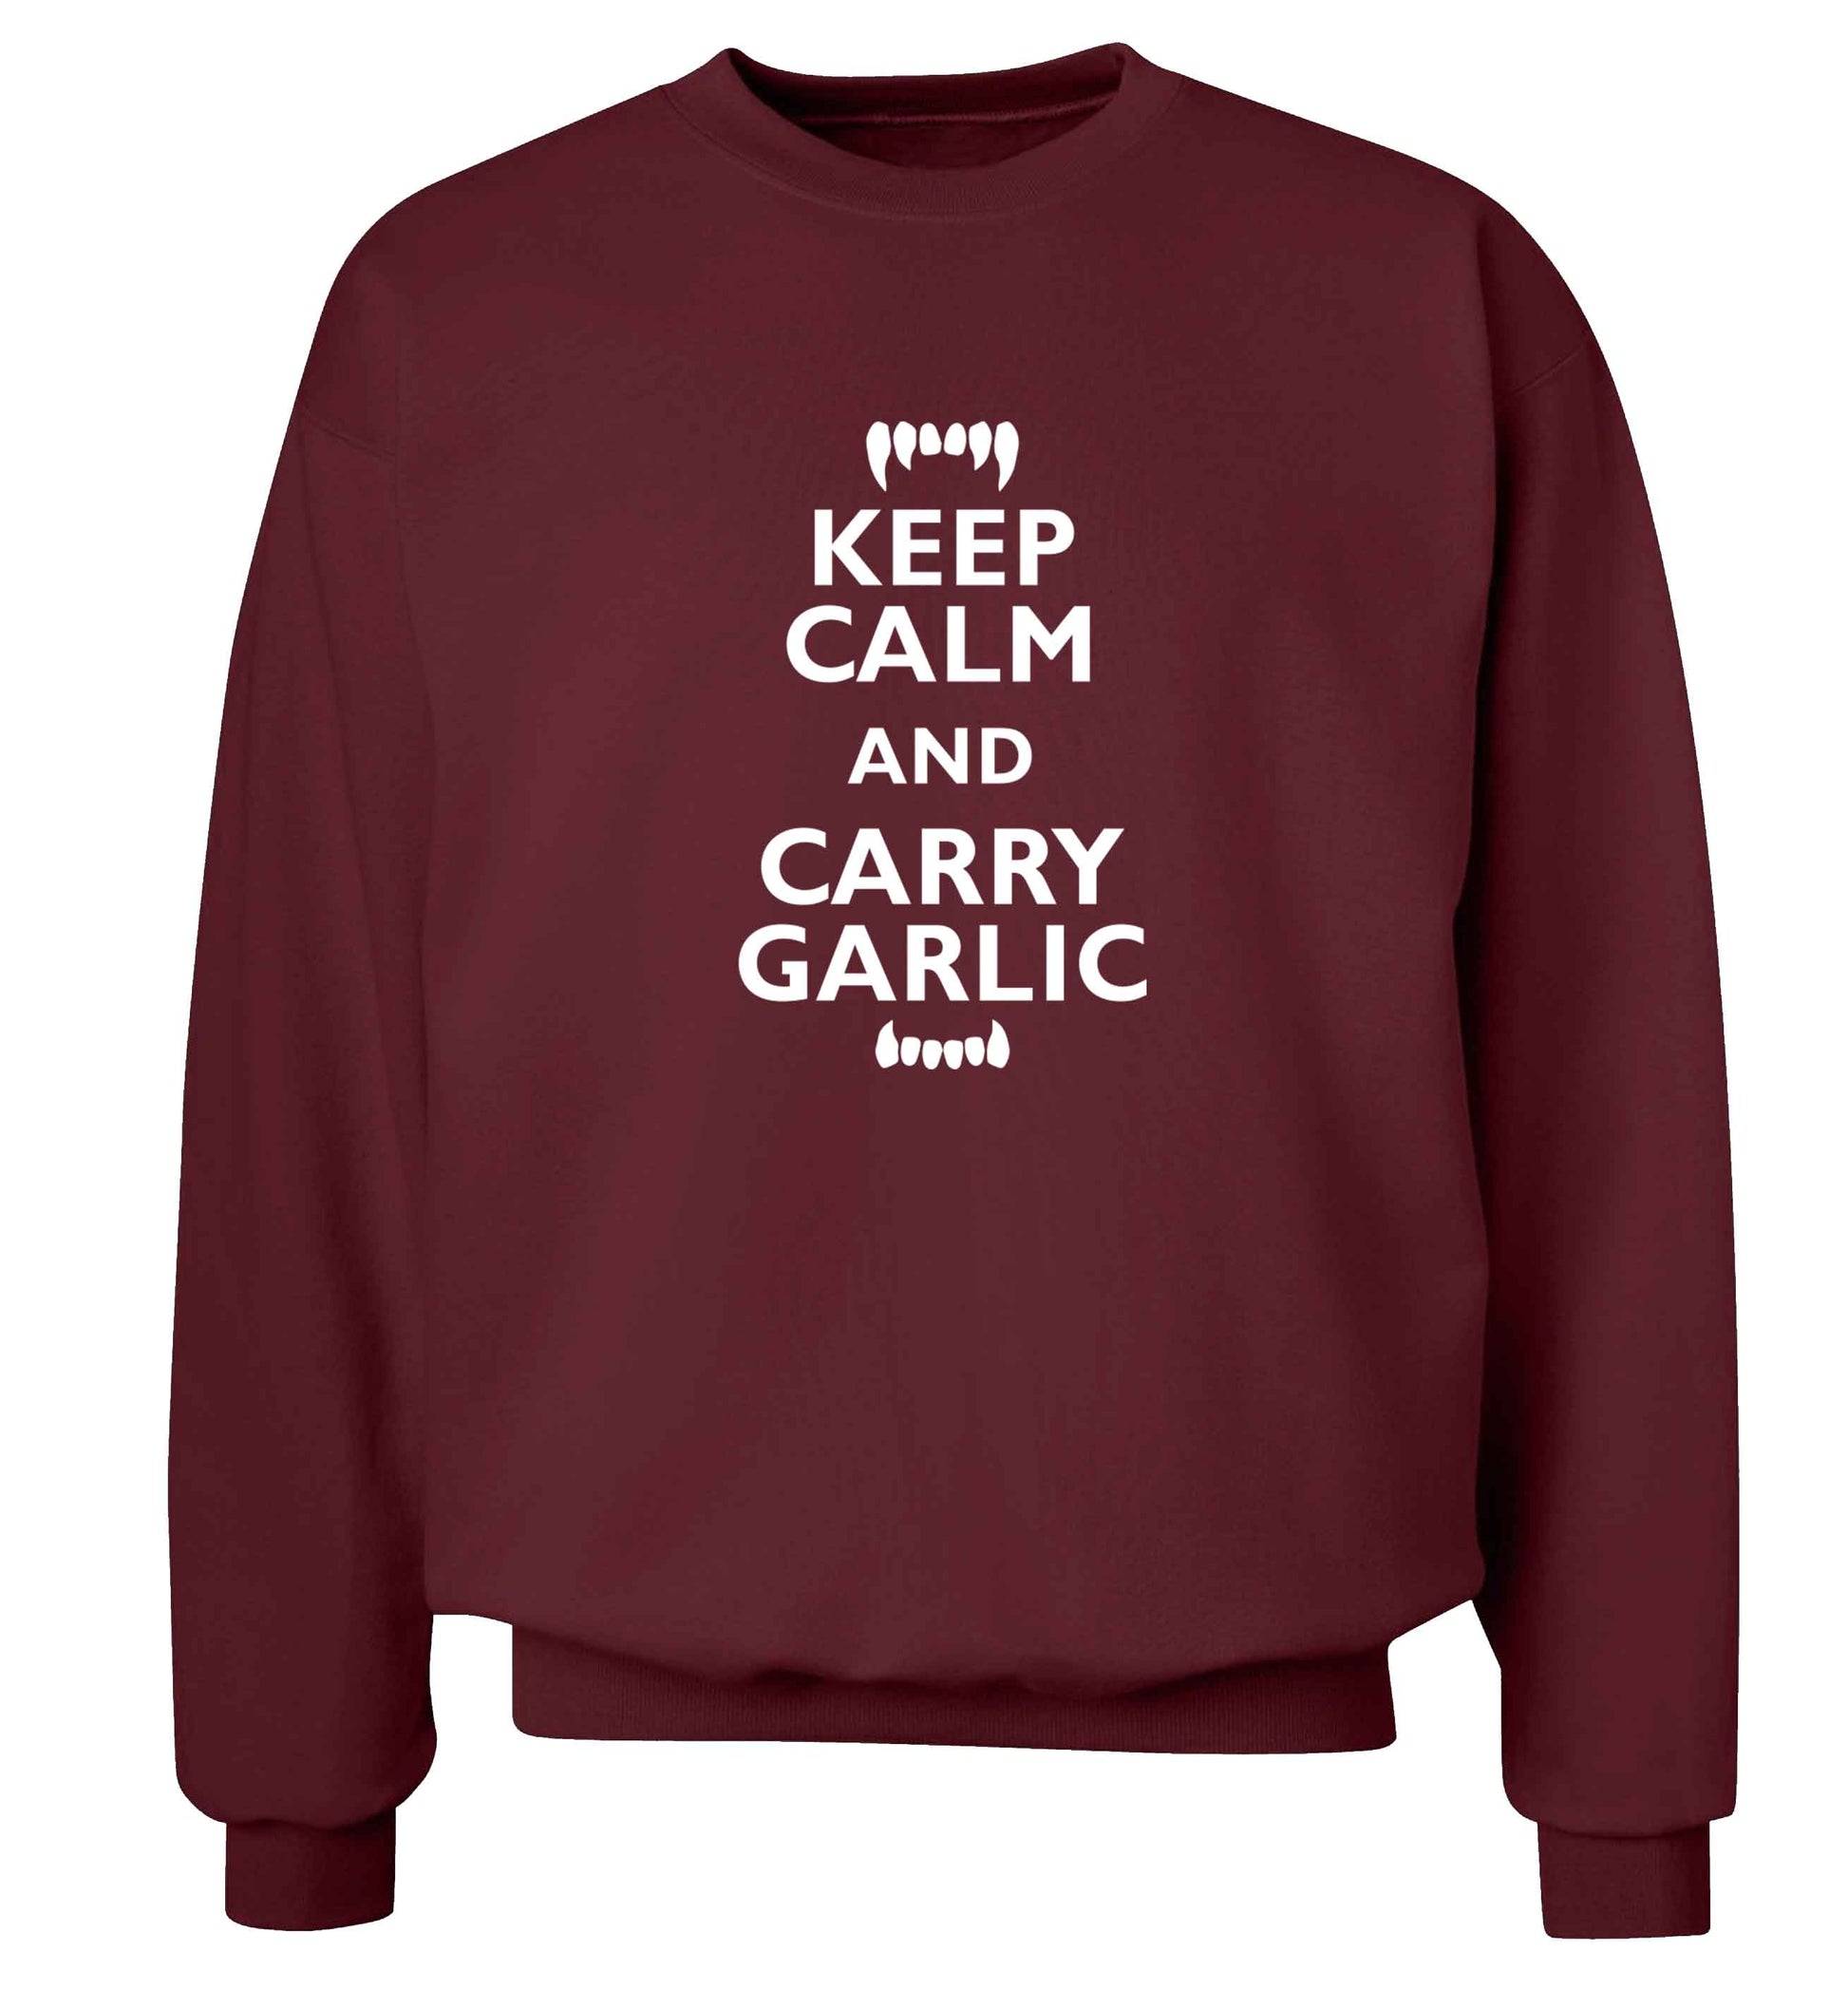 Keep calm and carry garlic adult's unisex maroon sweater 2XL